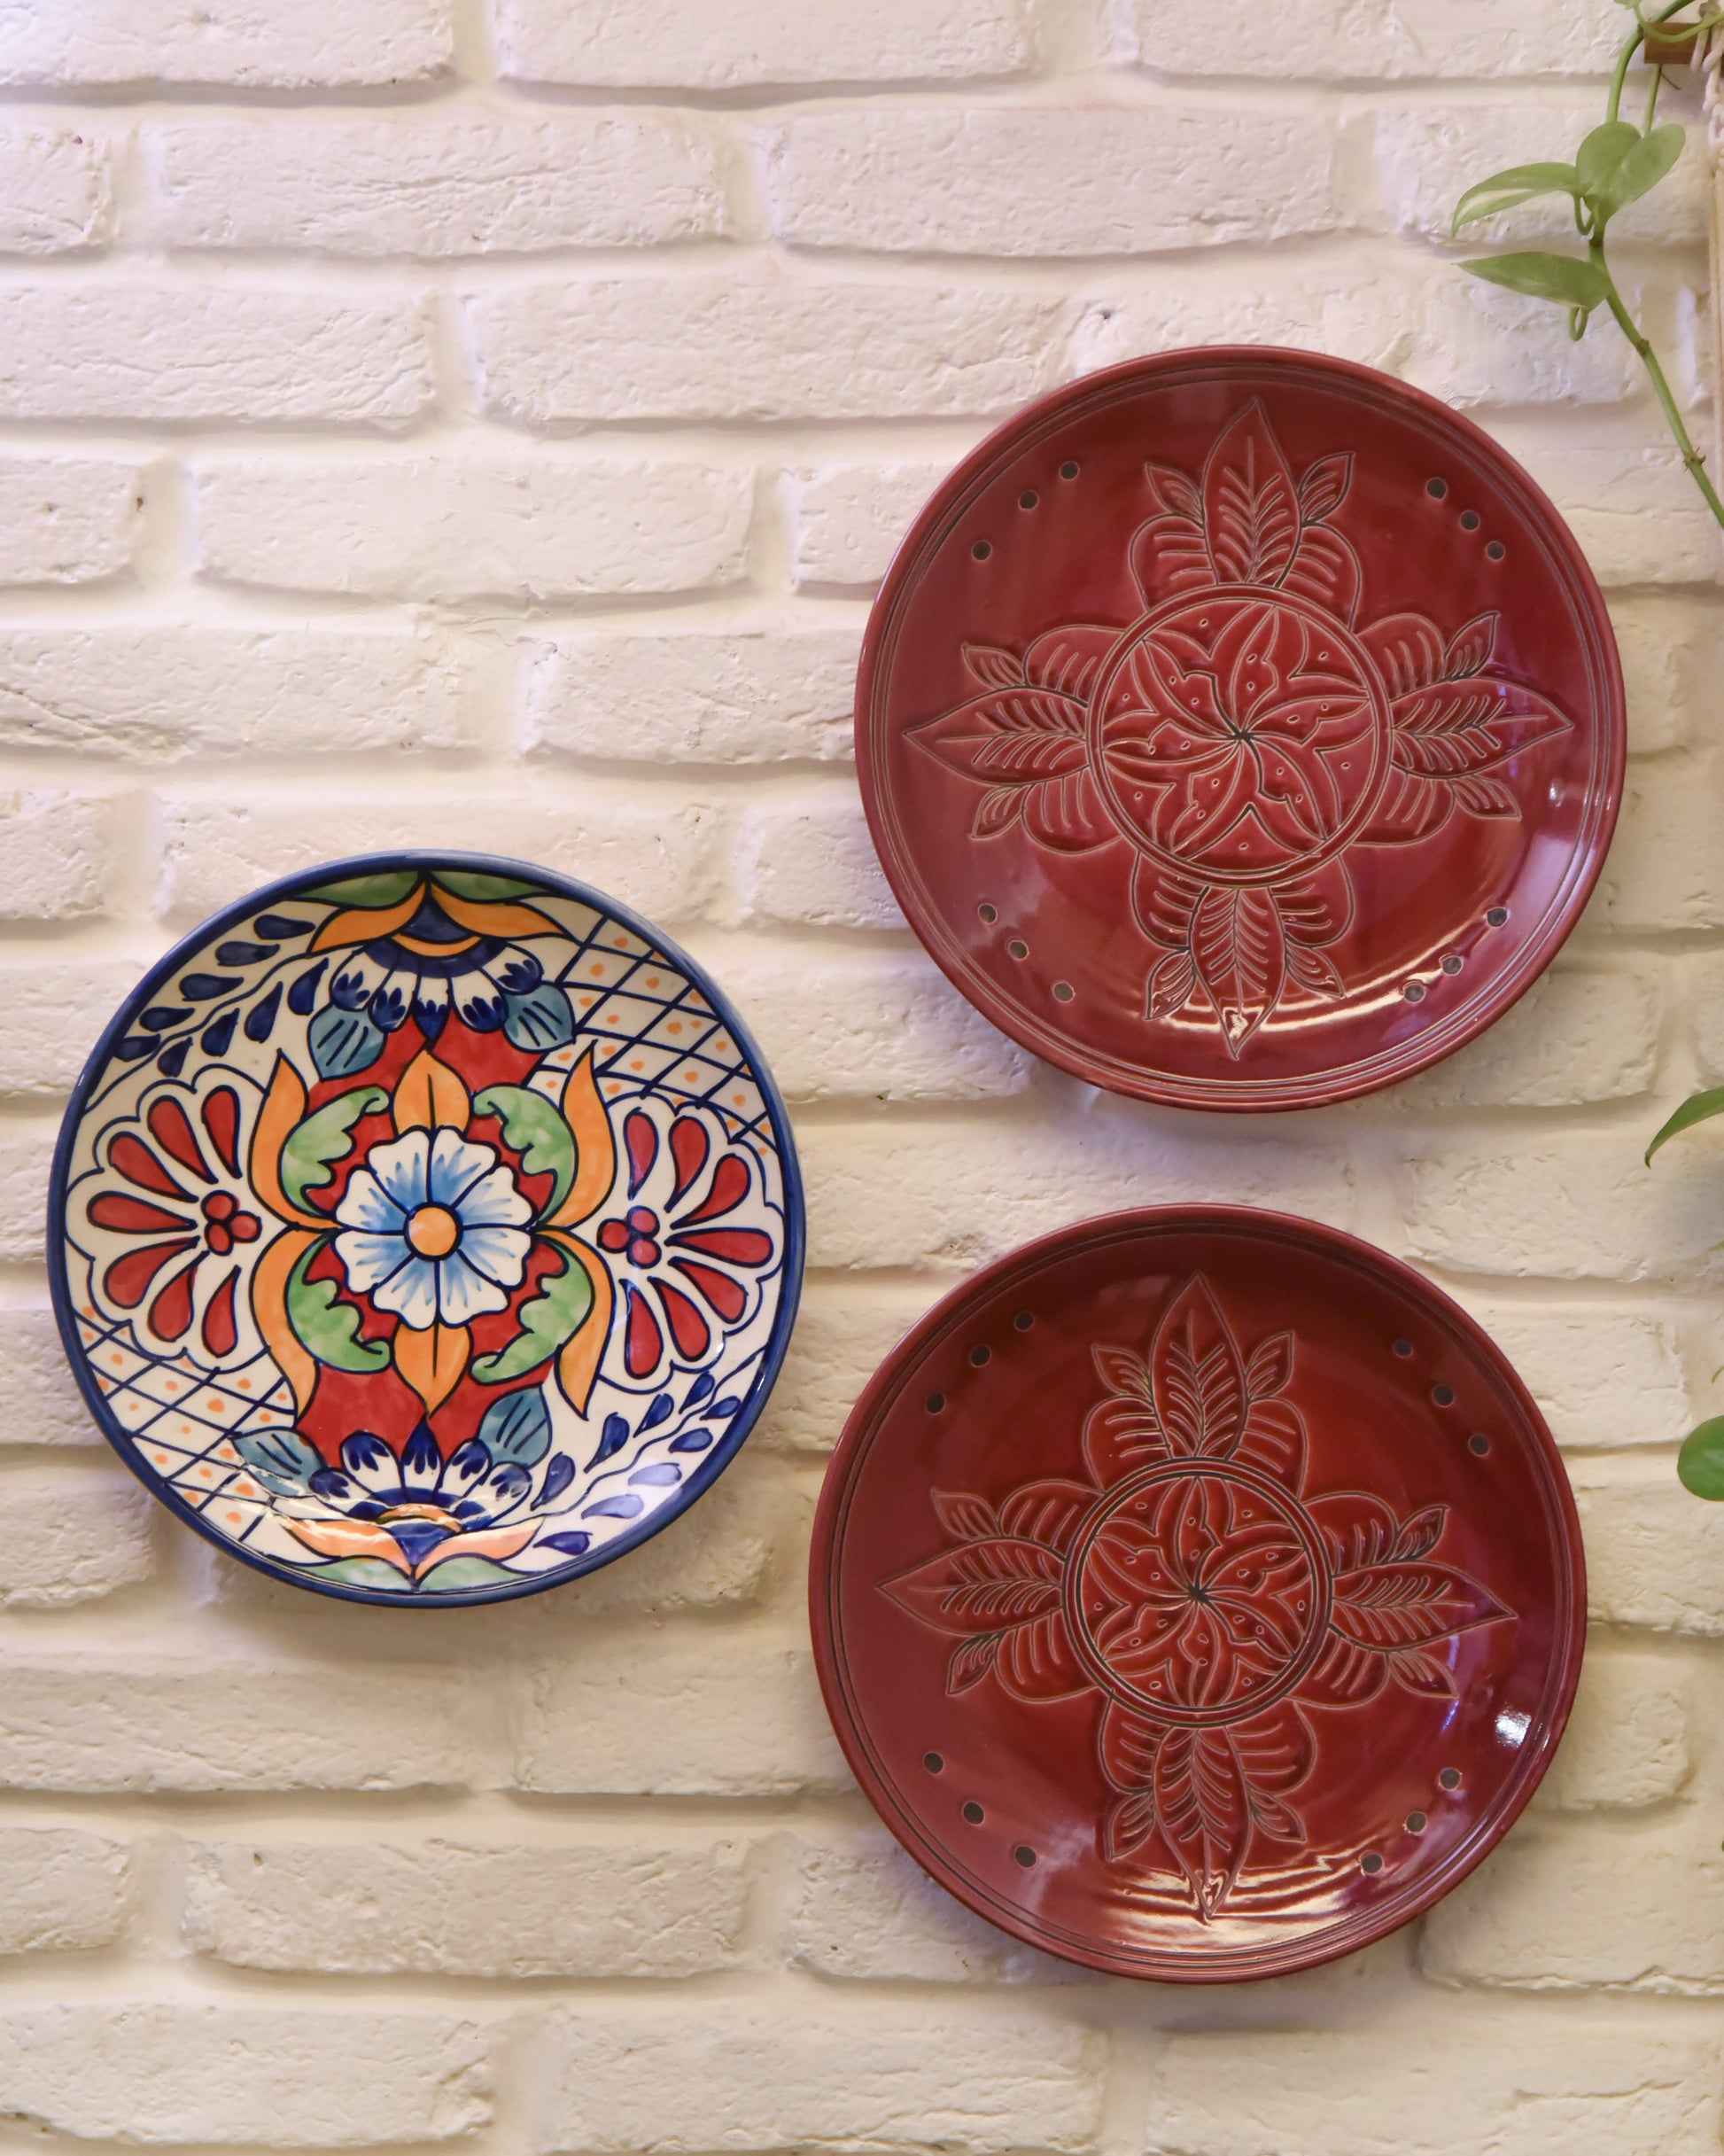  Artisanal Wall Plate Collection, Bedroom Wall Plate Ensemble, Classical Appeal Wall Décor, Classical Indian Wall Décor, Hand Painted Artisanal Plates, Handcrafted Home Accents, Handcrafted Indian Artisans, High-Quality Décor, Indian Artisan Wall Décor, Multicolored Floral Hanging Wall Plate, Unique Handcrafted Wall Plates, Unique Living Room Décor, Vibrant Floral Wall Art, Vibrant Wall Plate Set, Wall Hanging Hook Included, tesu